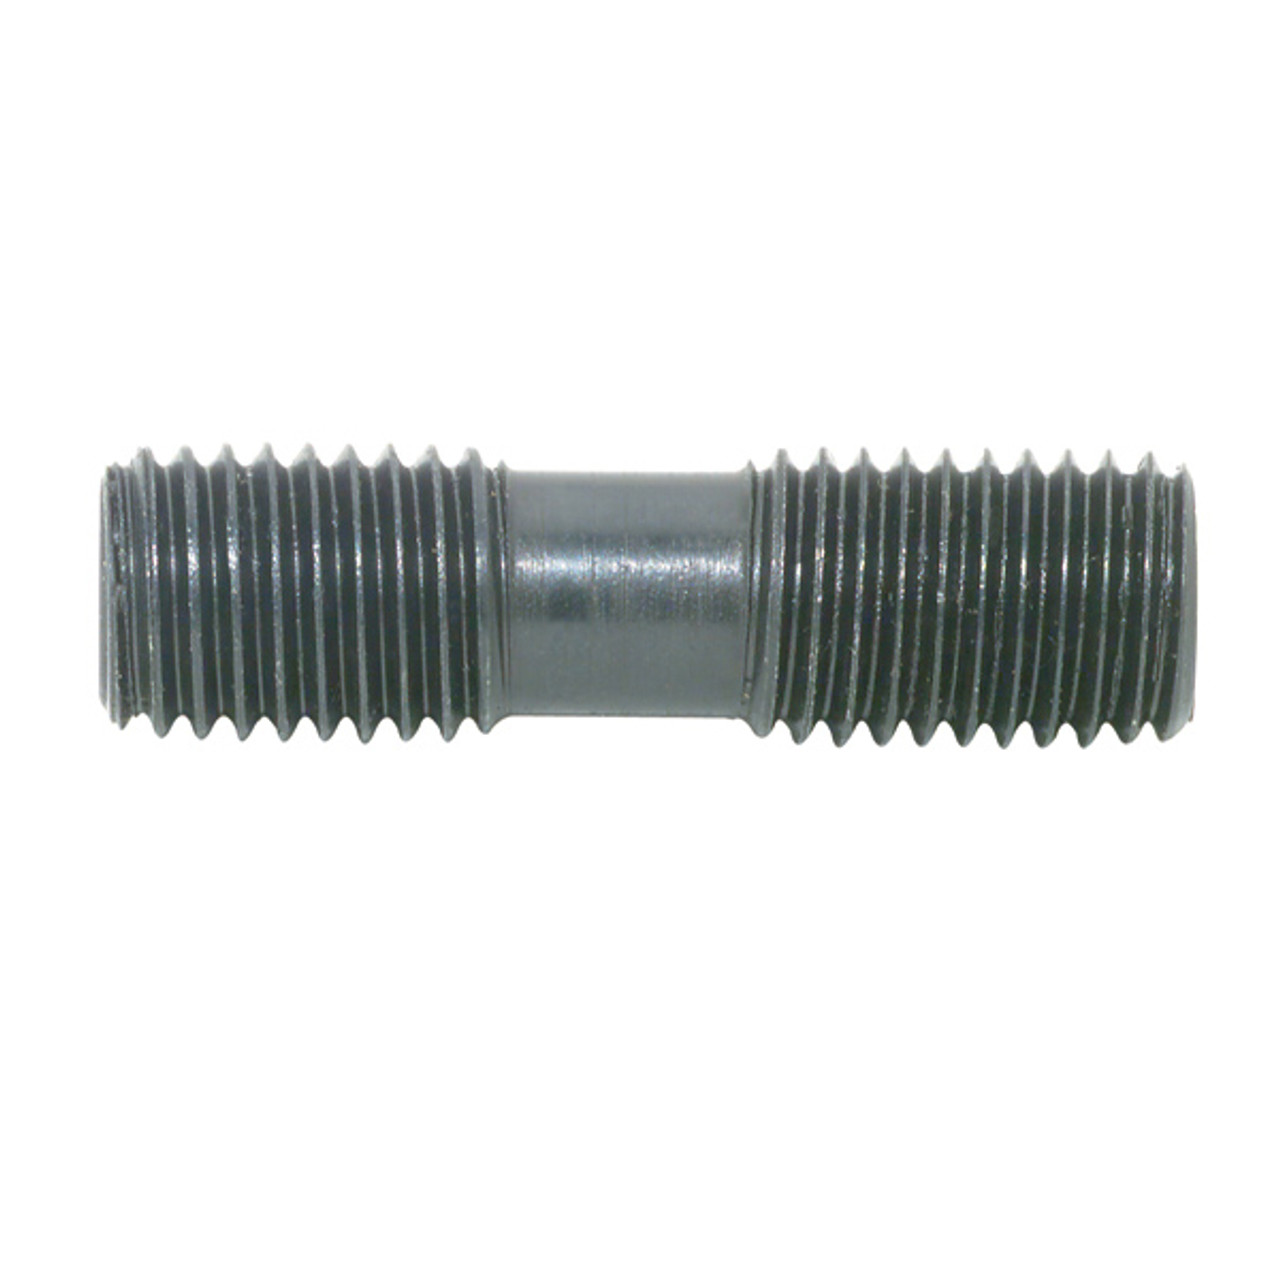 55-920-111      XNS35 DIFFERENTIAL SCREW